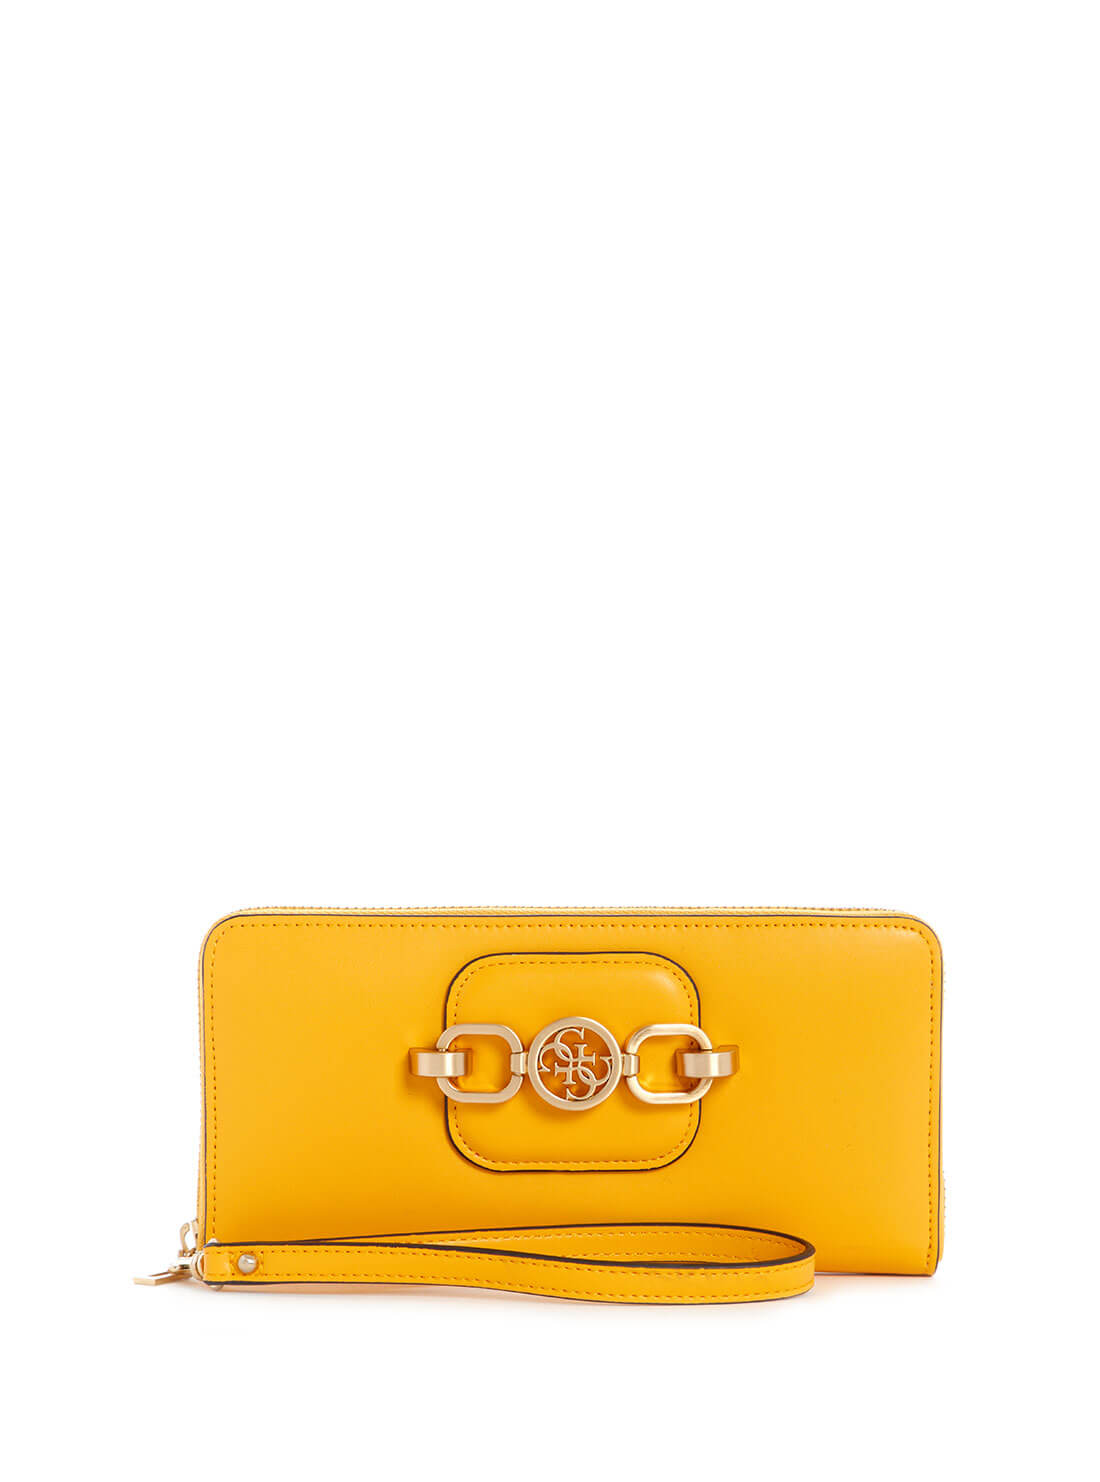 GUESS Womens Yellow Hensely Large Wallet VS811346 Front View